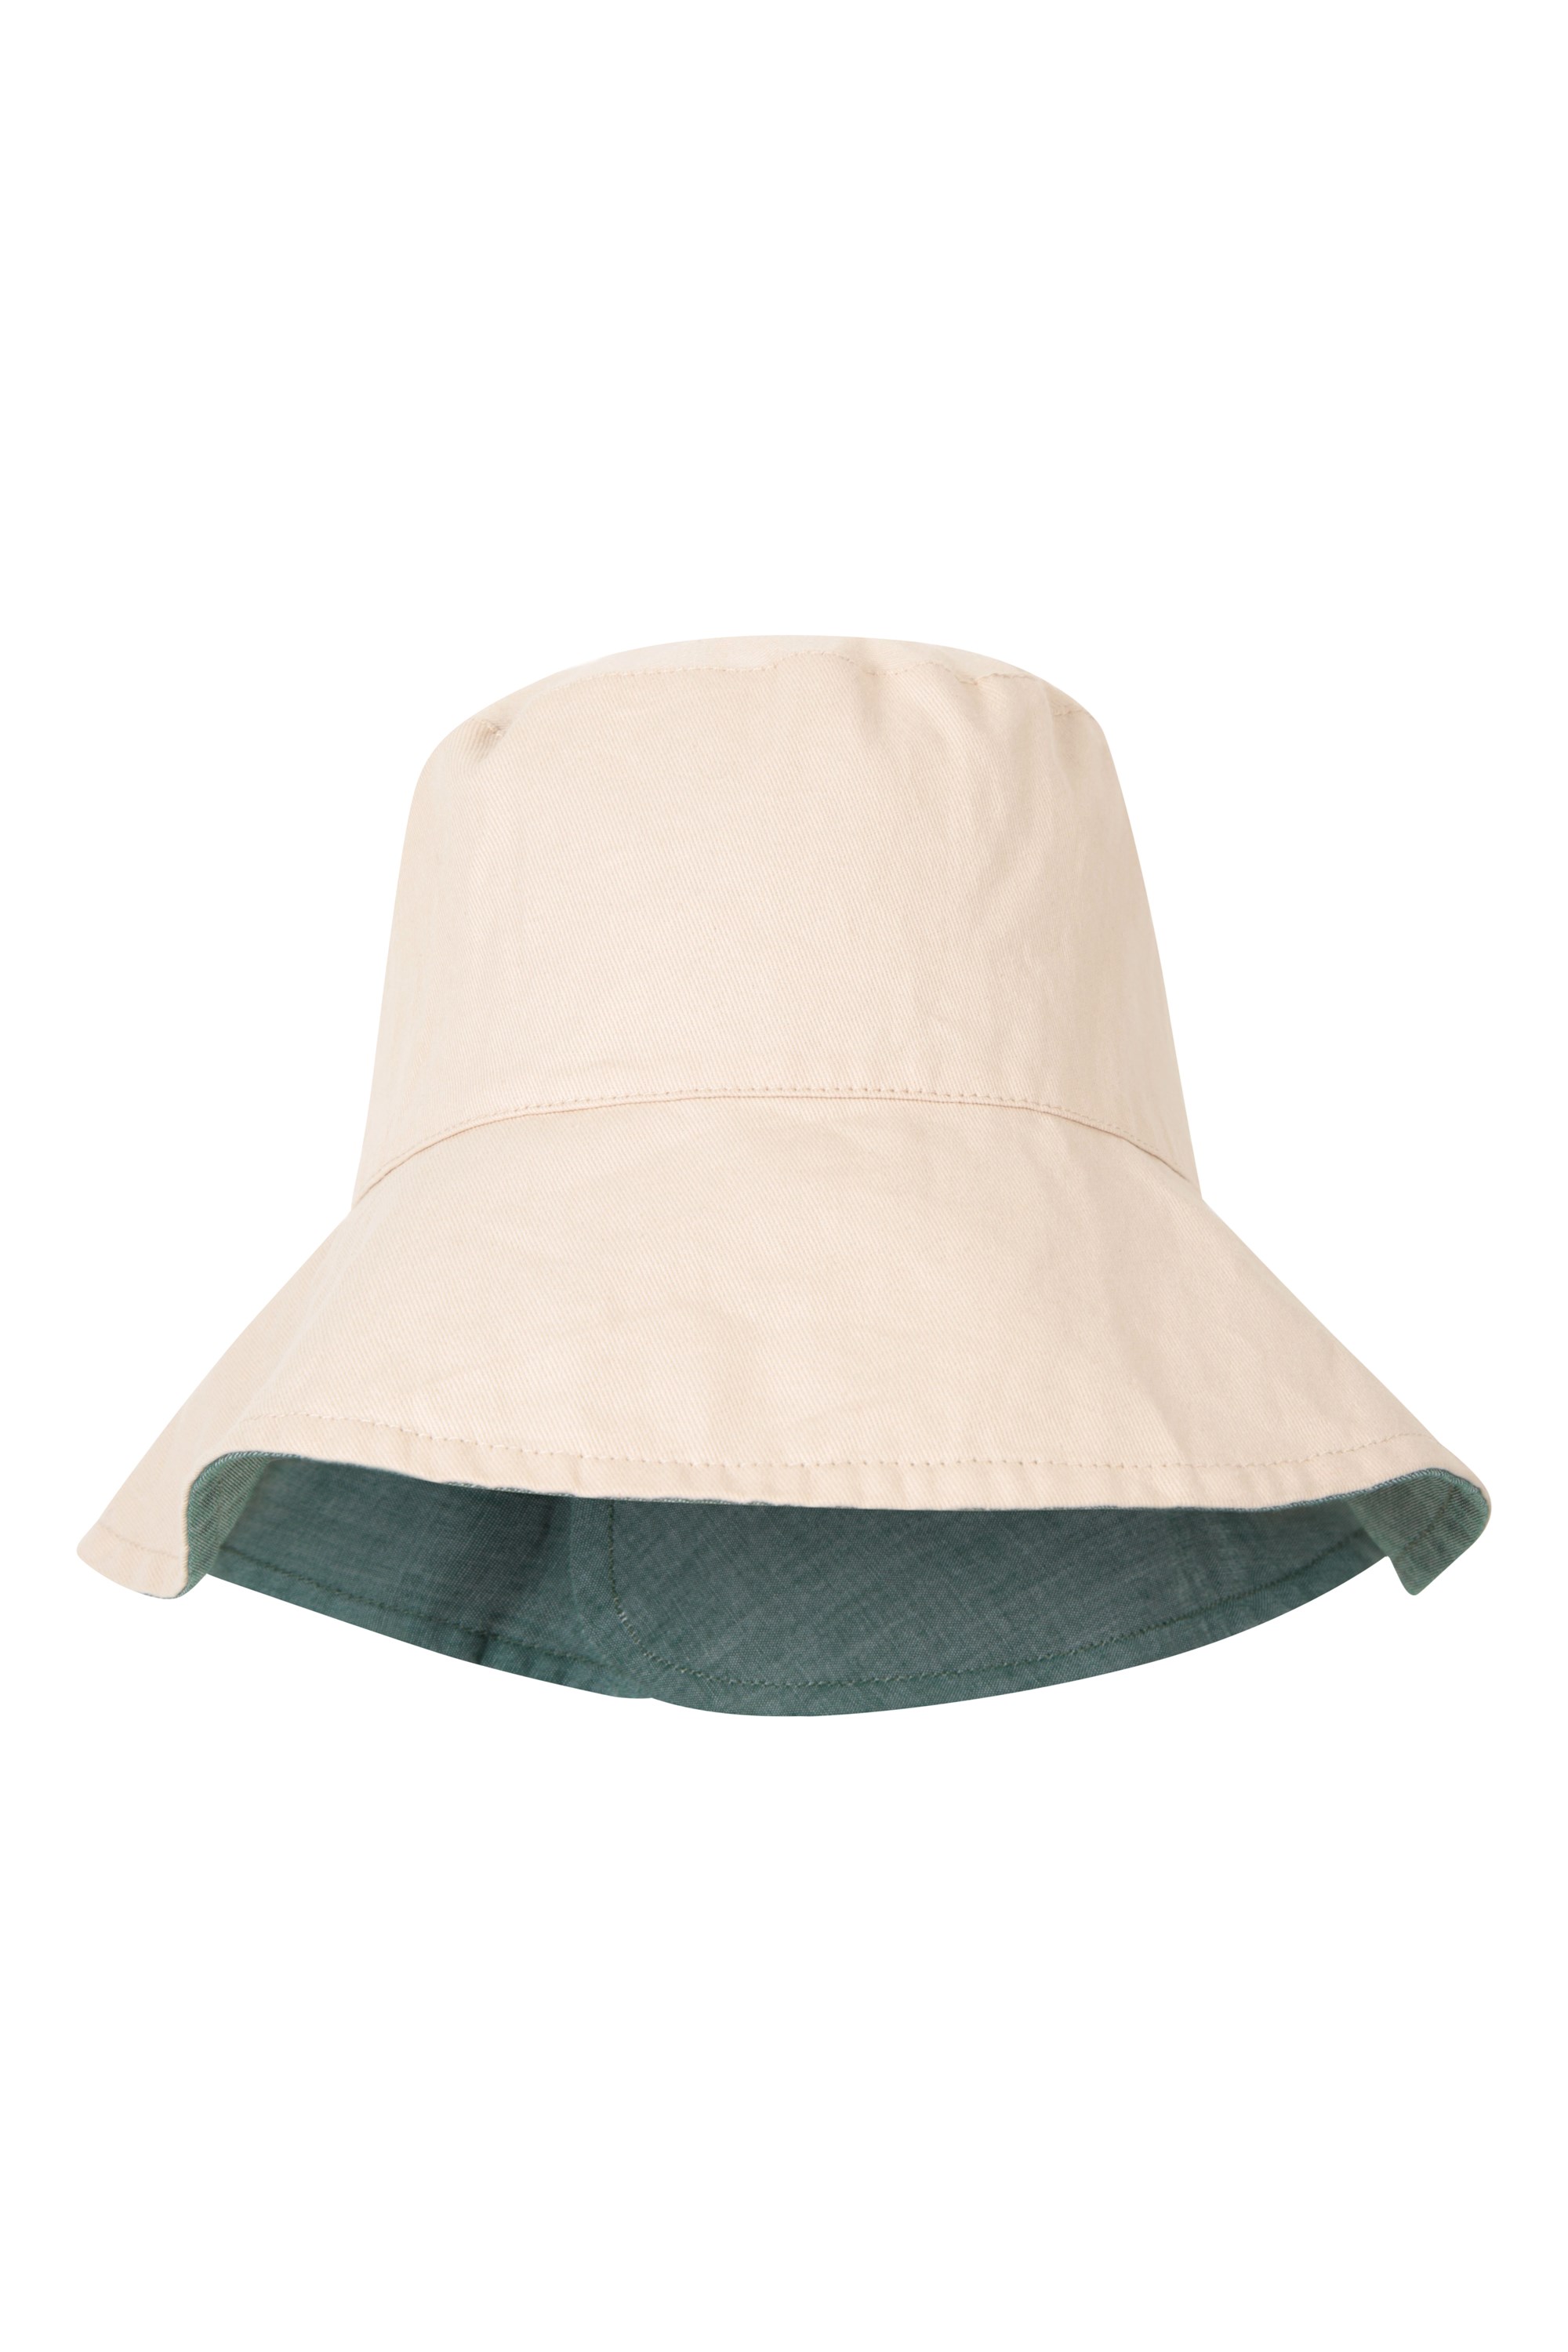 NWT Charter Club Reversible Packable Bucket Hat Women's Cap One Size